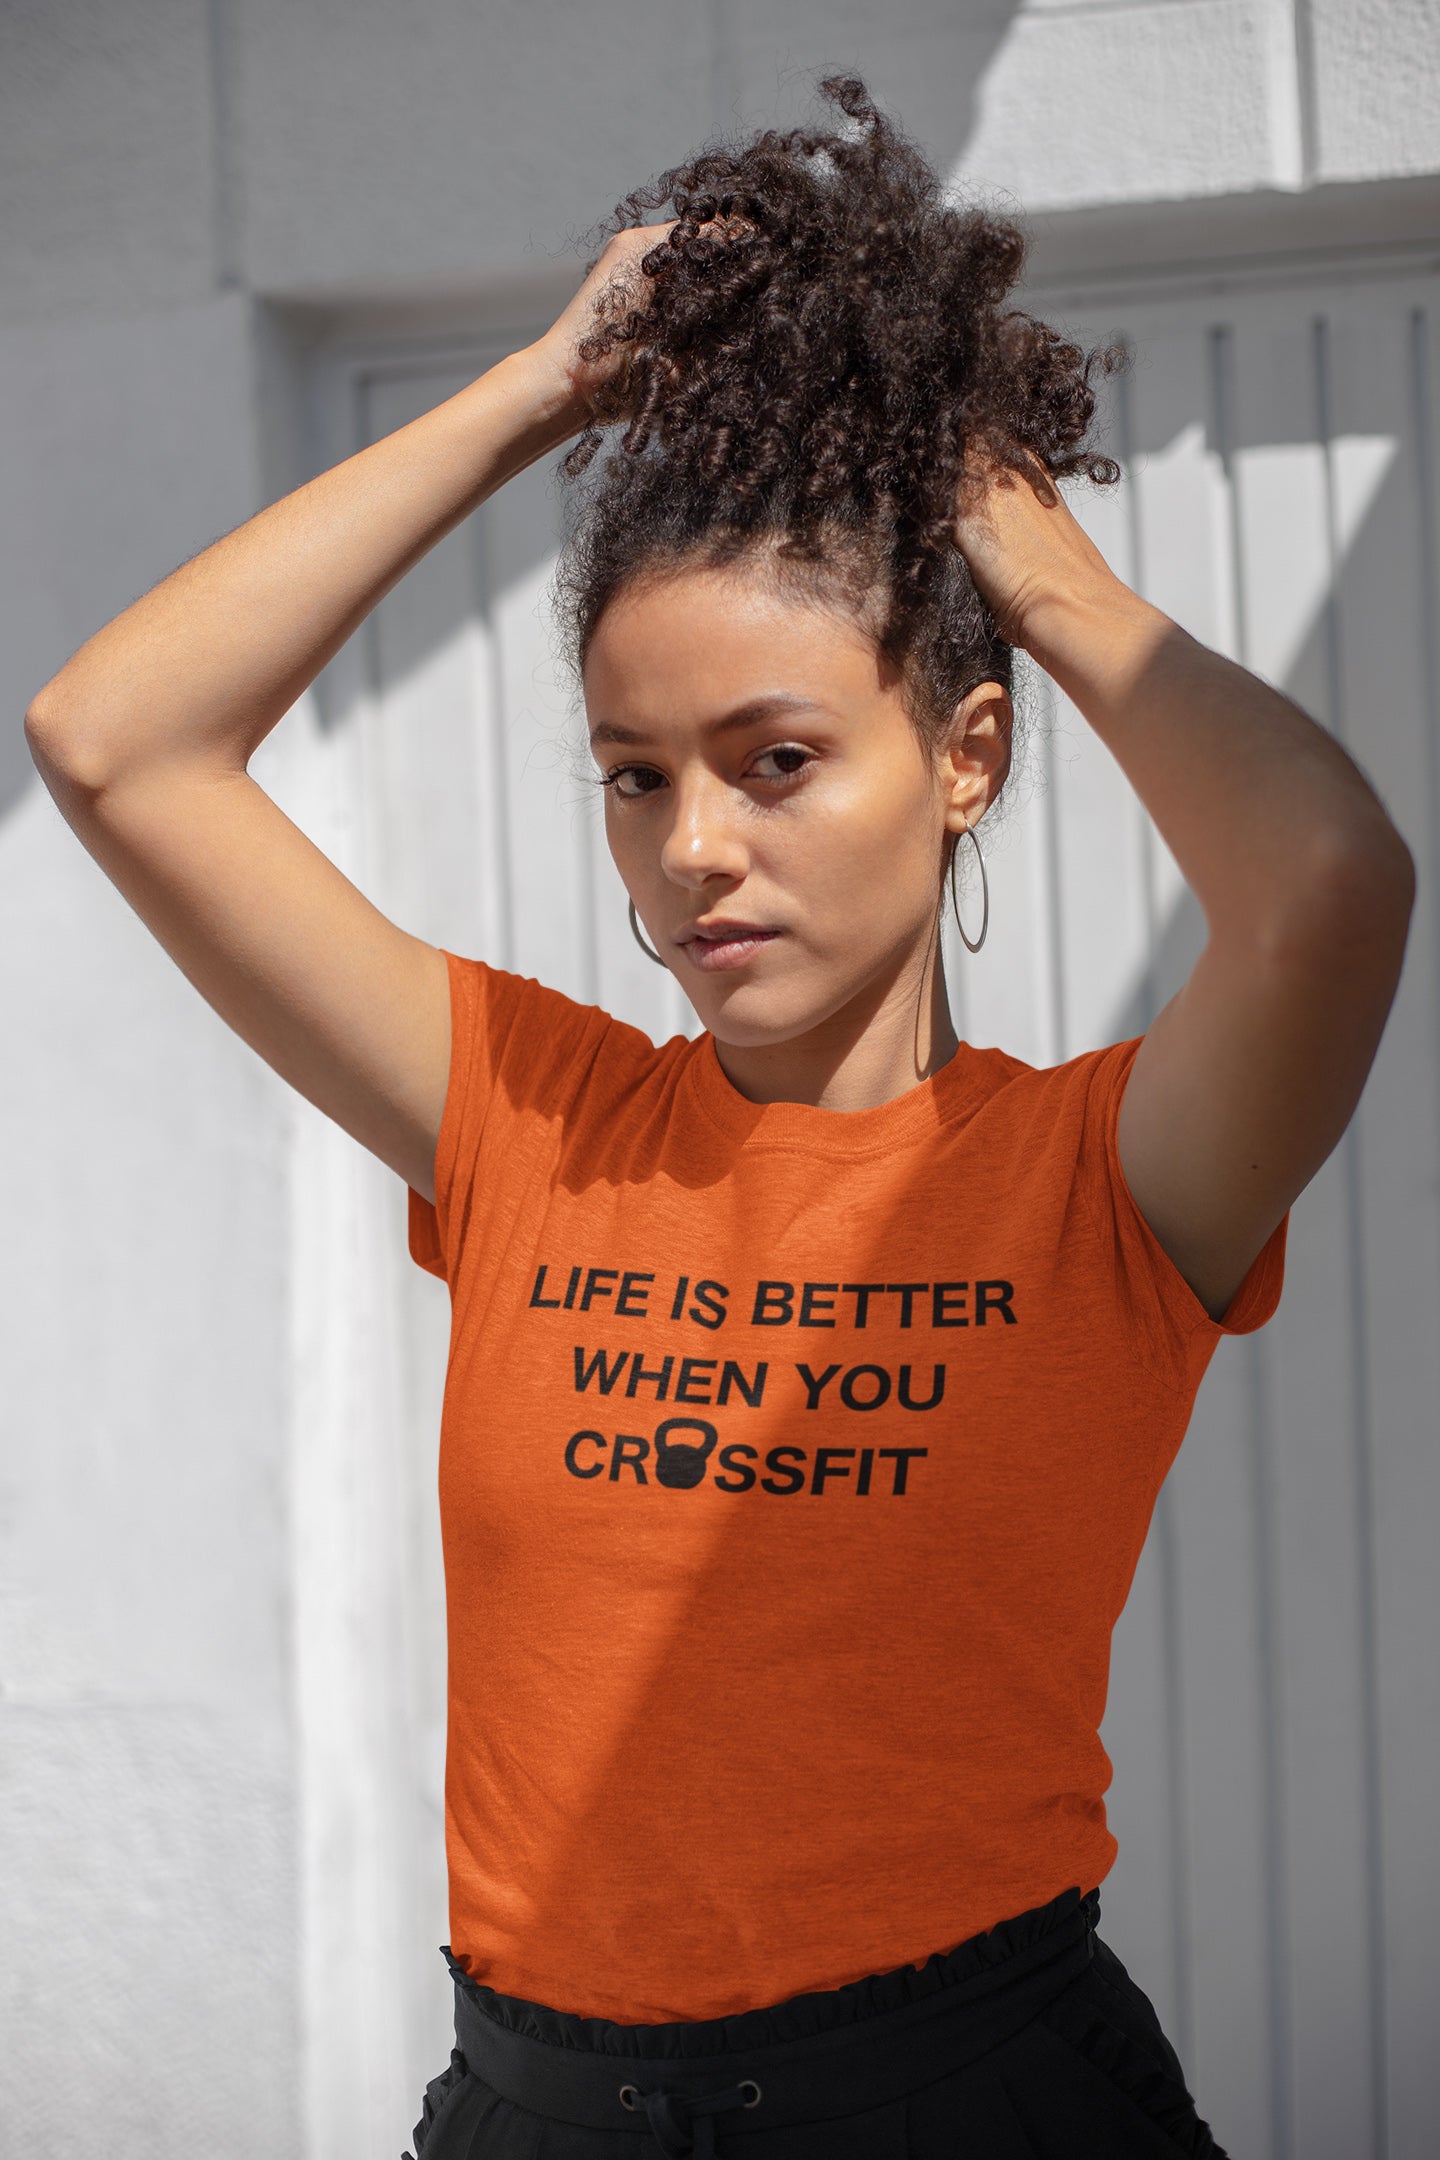 Life is better when you CrossFit